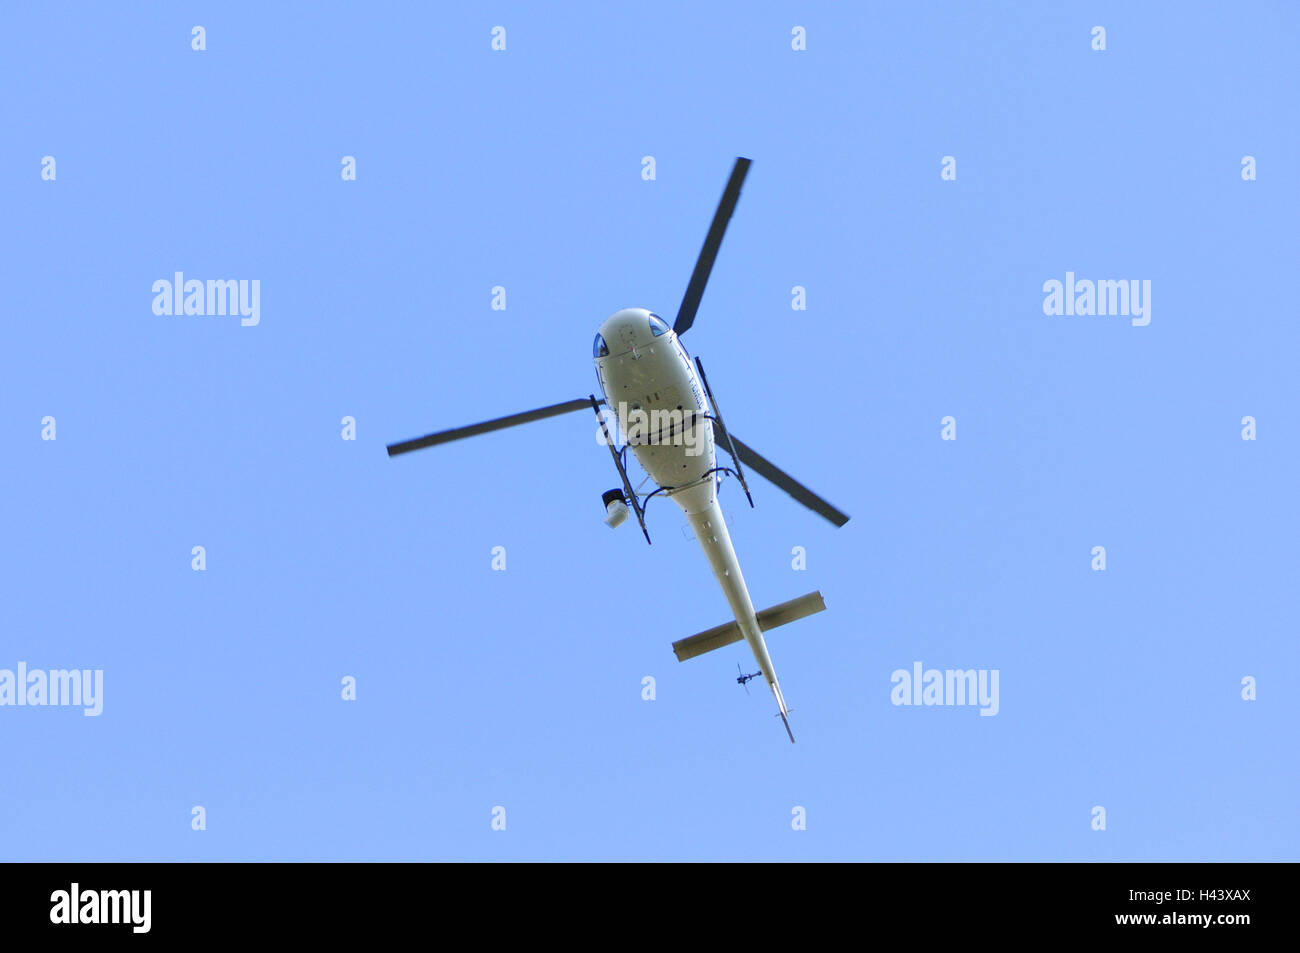 Police helicopter, from below, Stock Photo